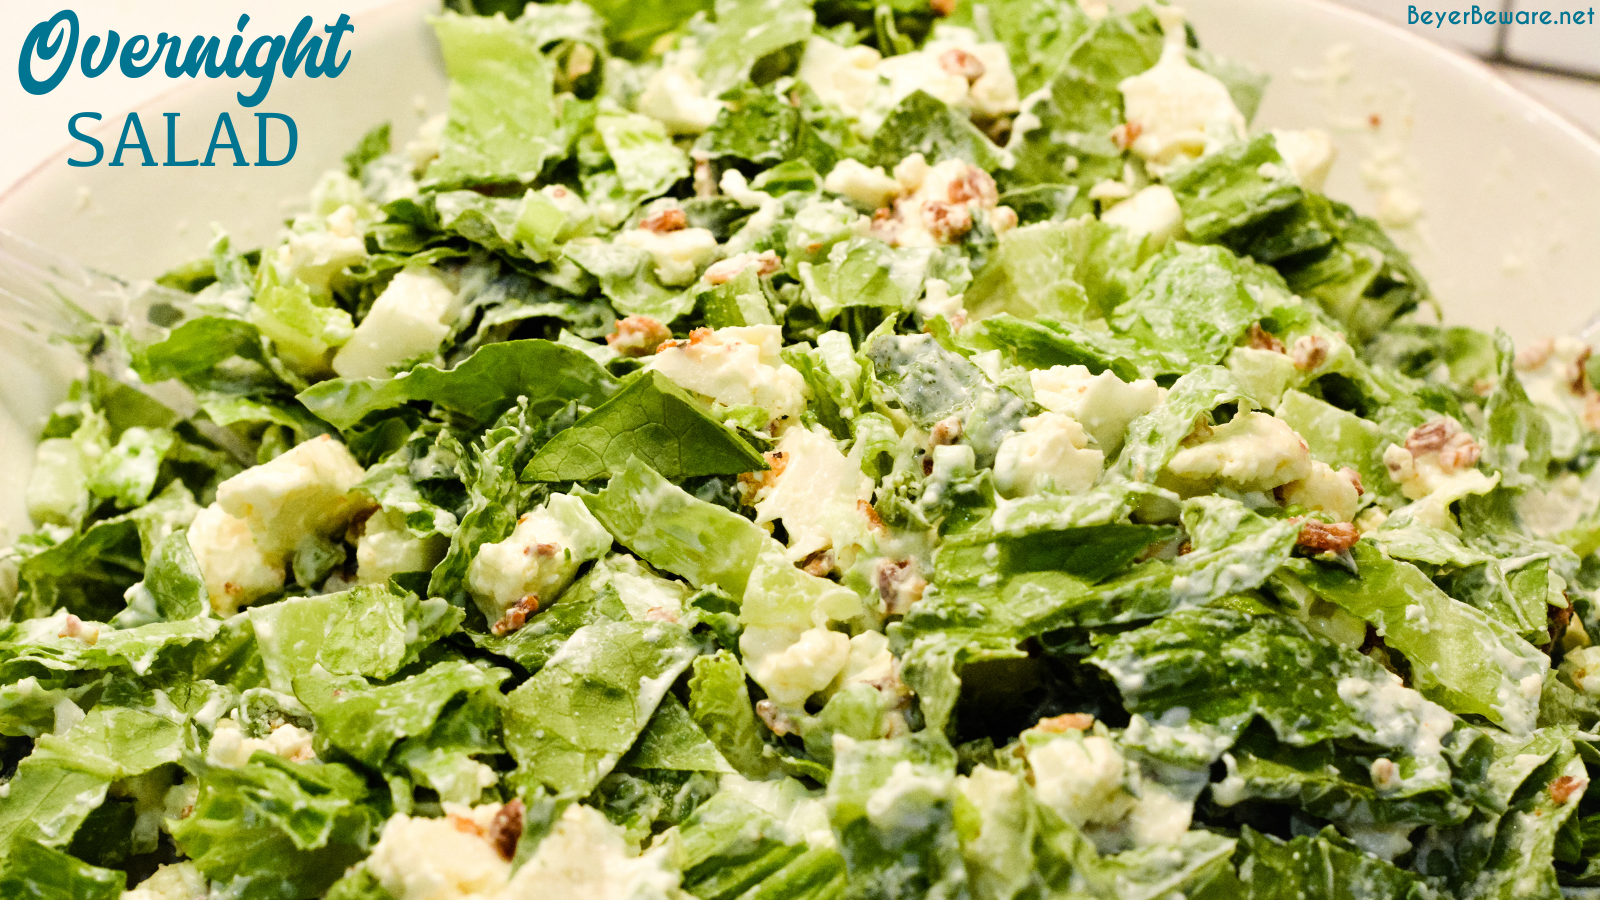 Overnight lettuce salad is my grandmother's version of 7 layer salad made with lettuce, cauliflower, mayonnaise, onions, celery, bacon, and parmesan cheese.